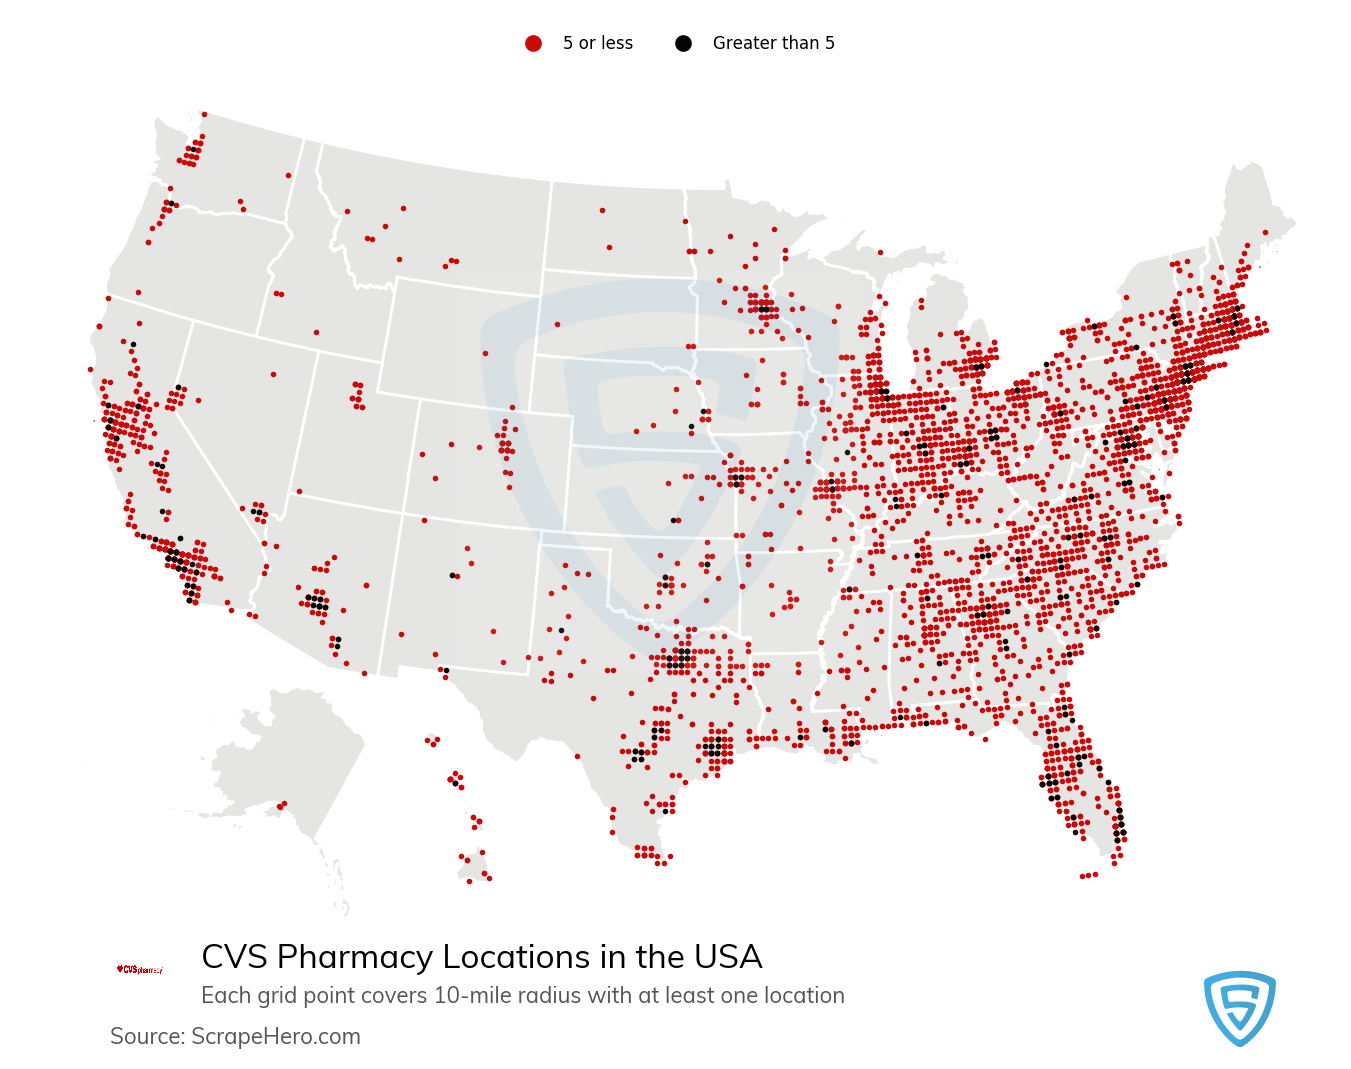 The Largest Pharmacies in the US - Location Analysis